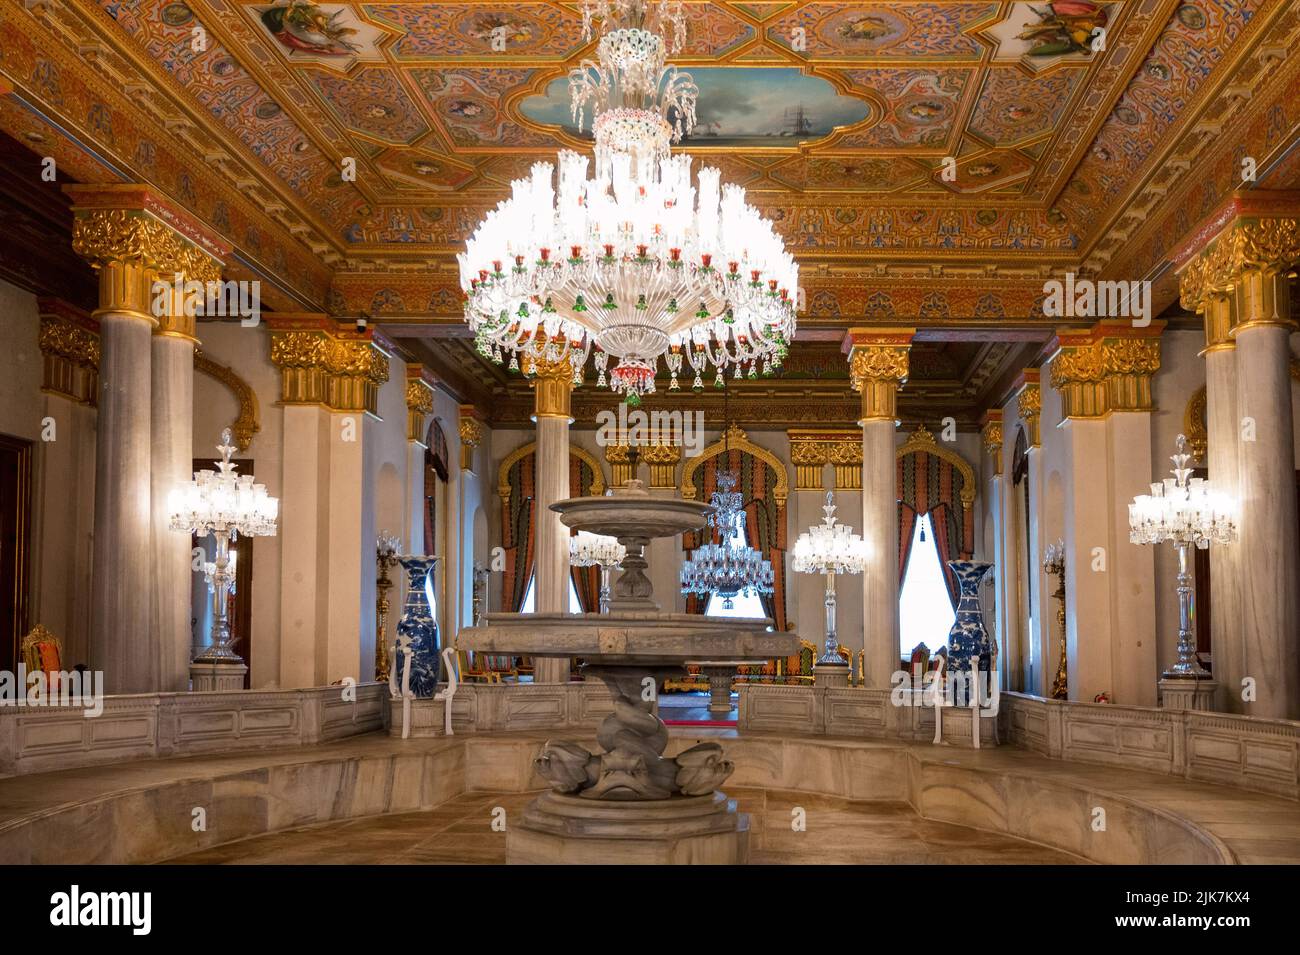 Interior of Beylerbeyi Palace. The view of hall with a Swimming Pool. Stock Photo